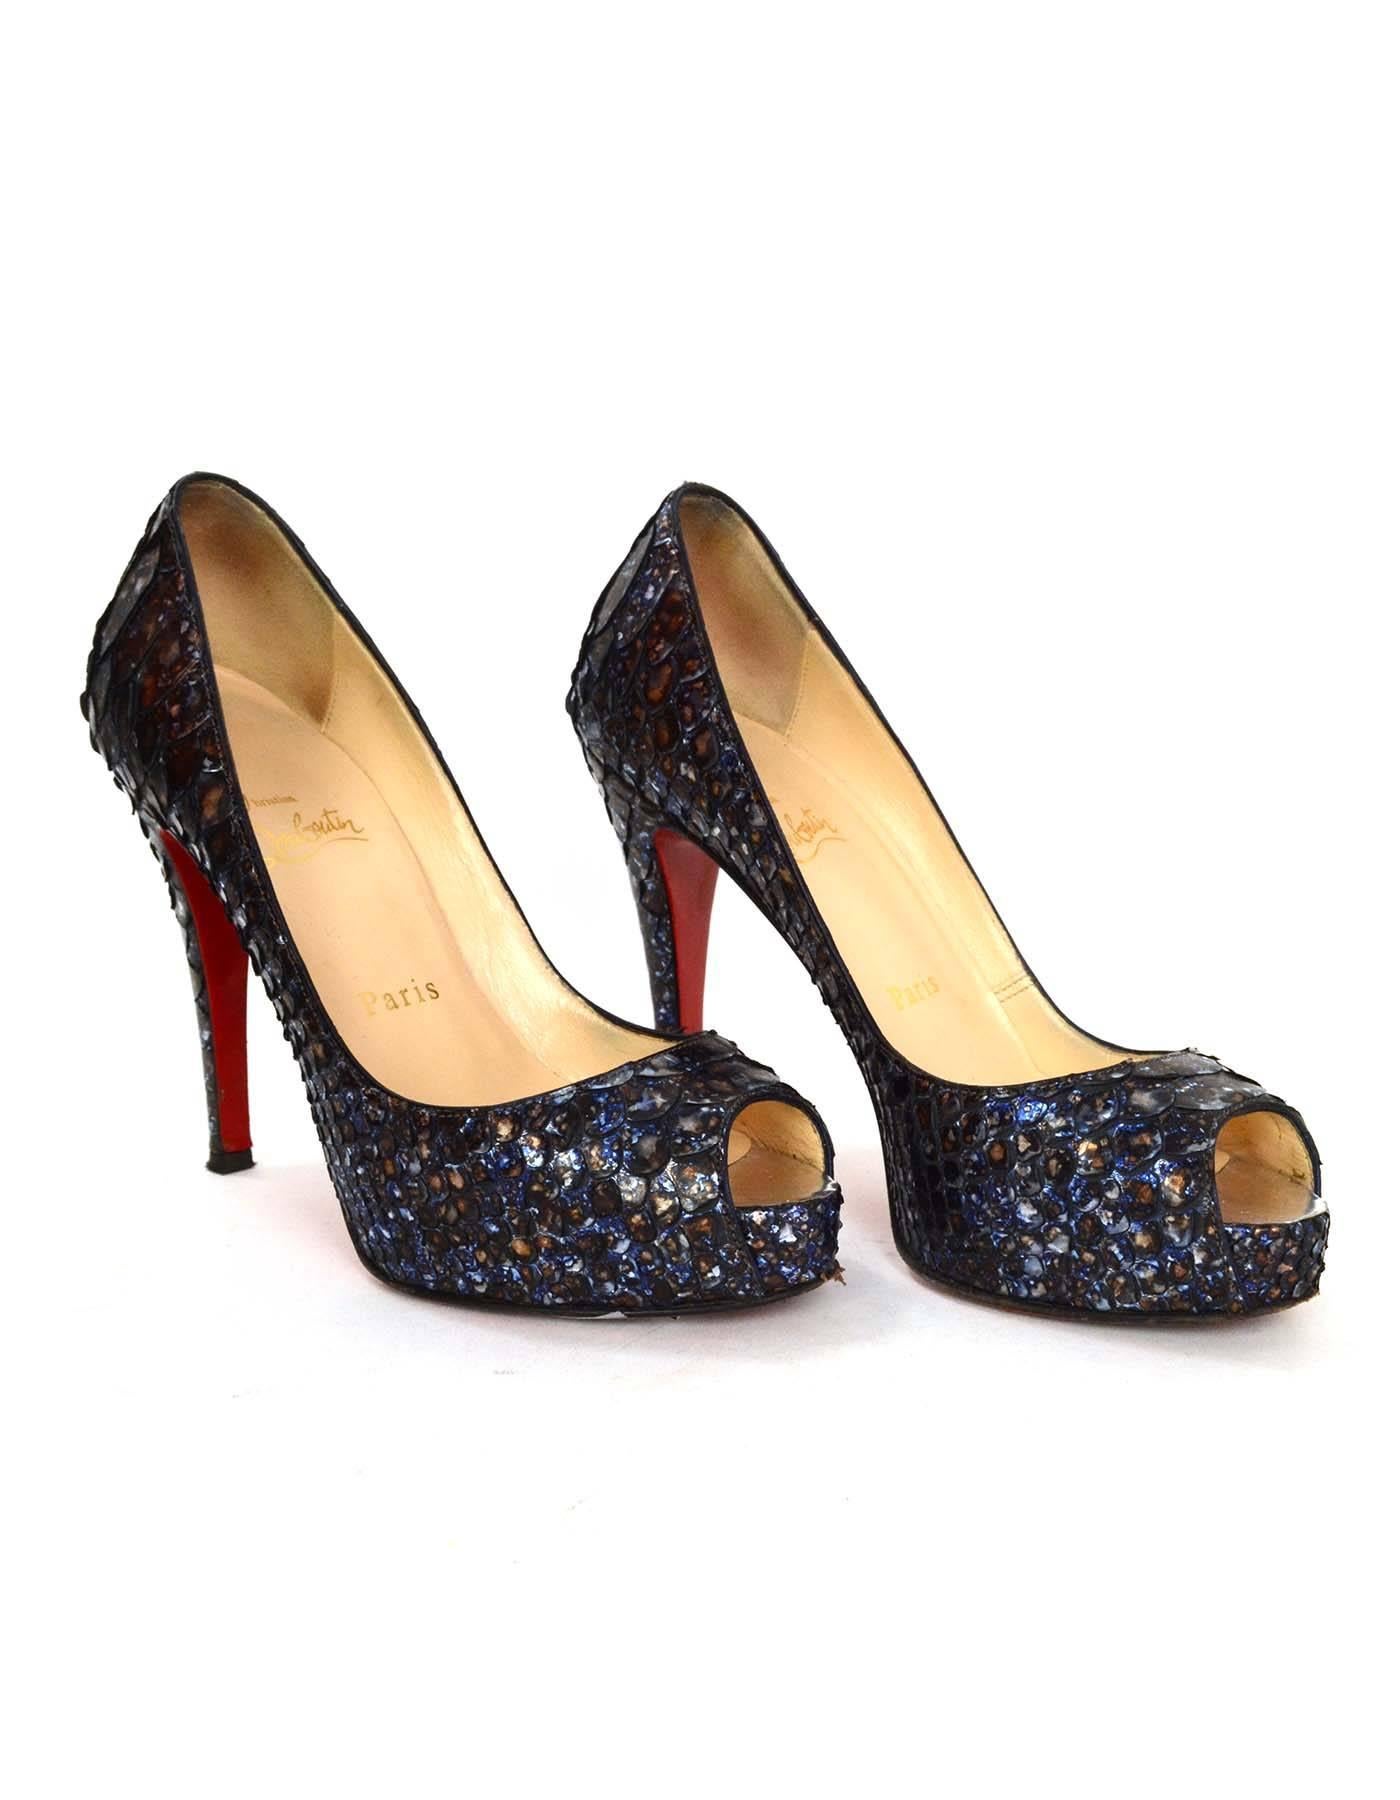 Christian Louboutin Metallic Blue Python 'Very Prive' Peep-Toe Pumps sz 35.5 In Excellent Condition In New York, NY